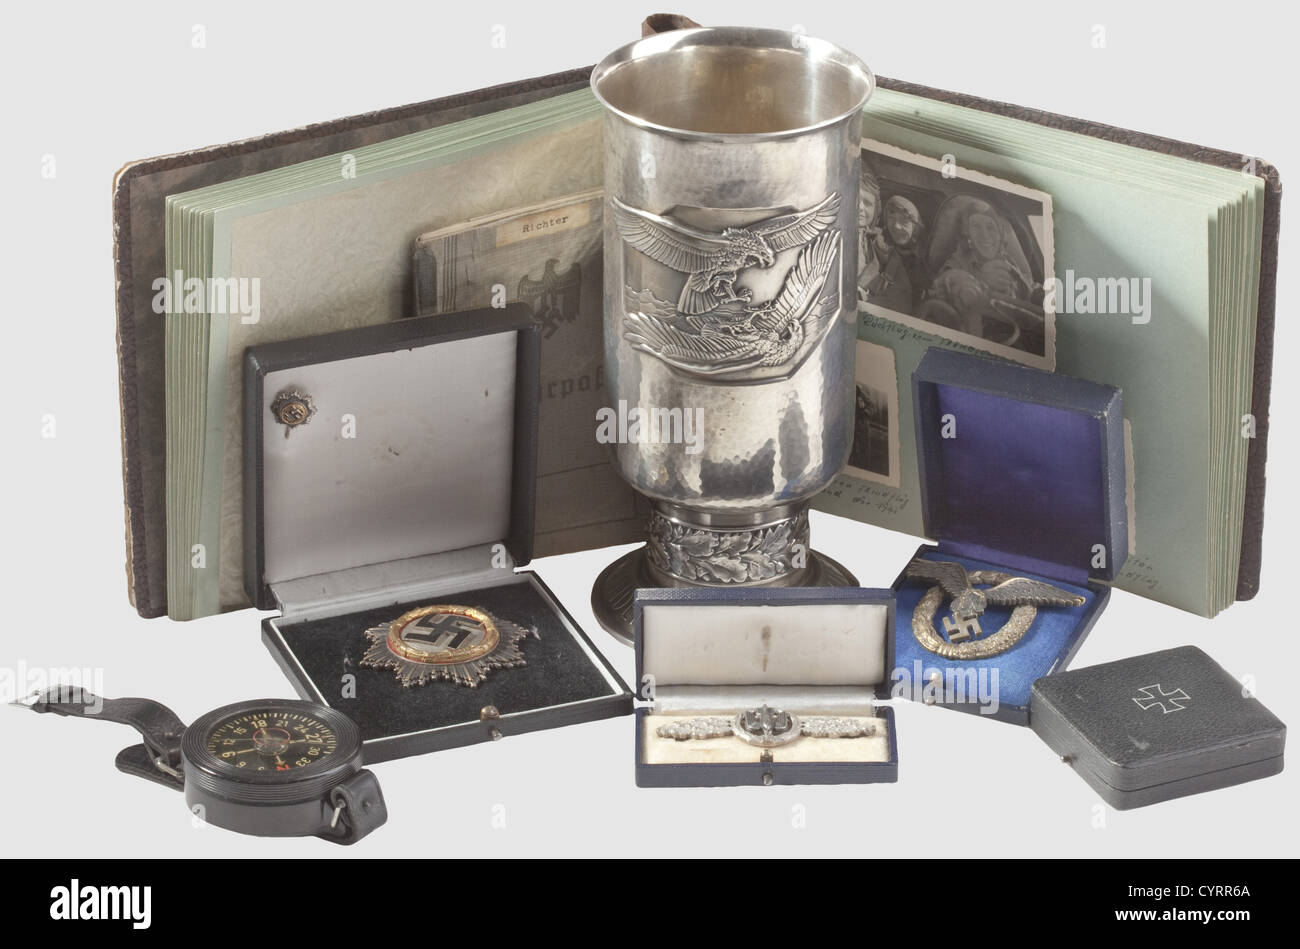 Legacy of pilot Heinrich Richter(1912 - 1972),a goblet of honour,decorations and Wehrpass from 3./ KG 27 Boelcke German Cross in Gold ,maker Deschler('1')with scribed engraving 'Richter - Fw',attachment system and enamel repaired,in award presentation case. Included is the rare 16 mm miniature on a pin with maker's punch 'L/12' and a f historic,historical,1930s,20th century,Air Force,branch of service,branches of service,armed service,armed services,military,militaria,air forces,object,objects,stills,clipping,clippings,cut out,cut-out,,Additional-Rights-Clearences-Not Available Stock Photo